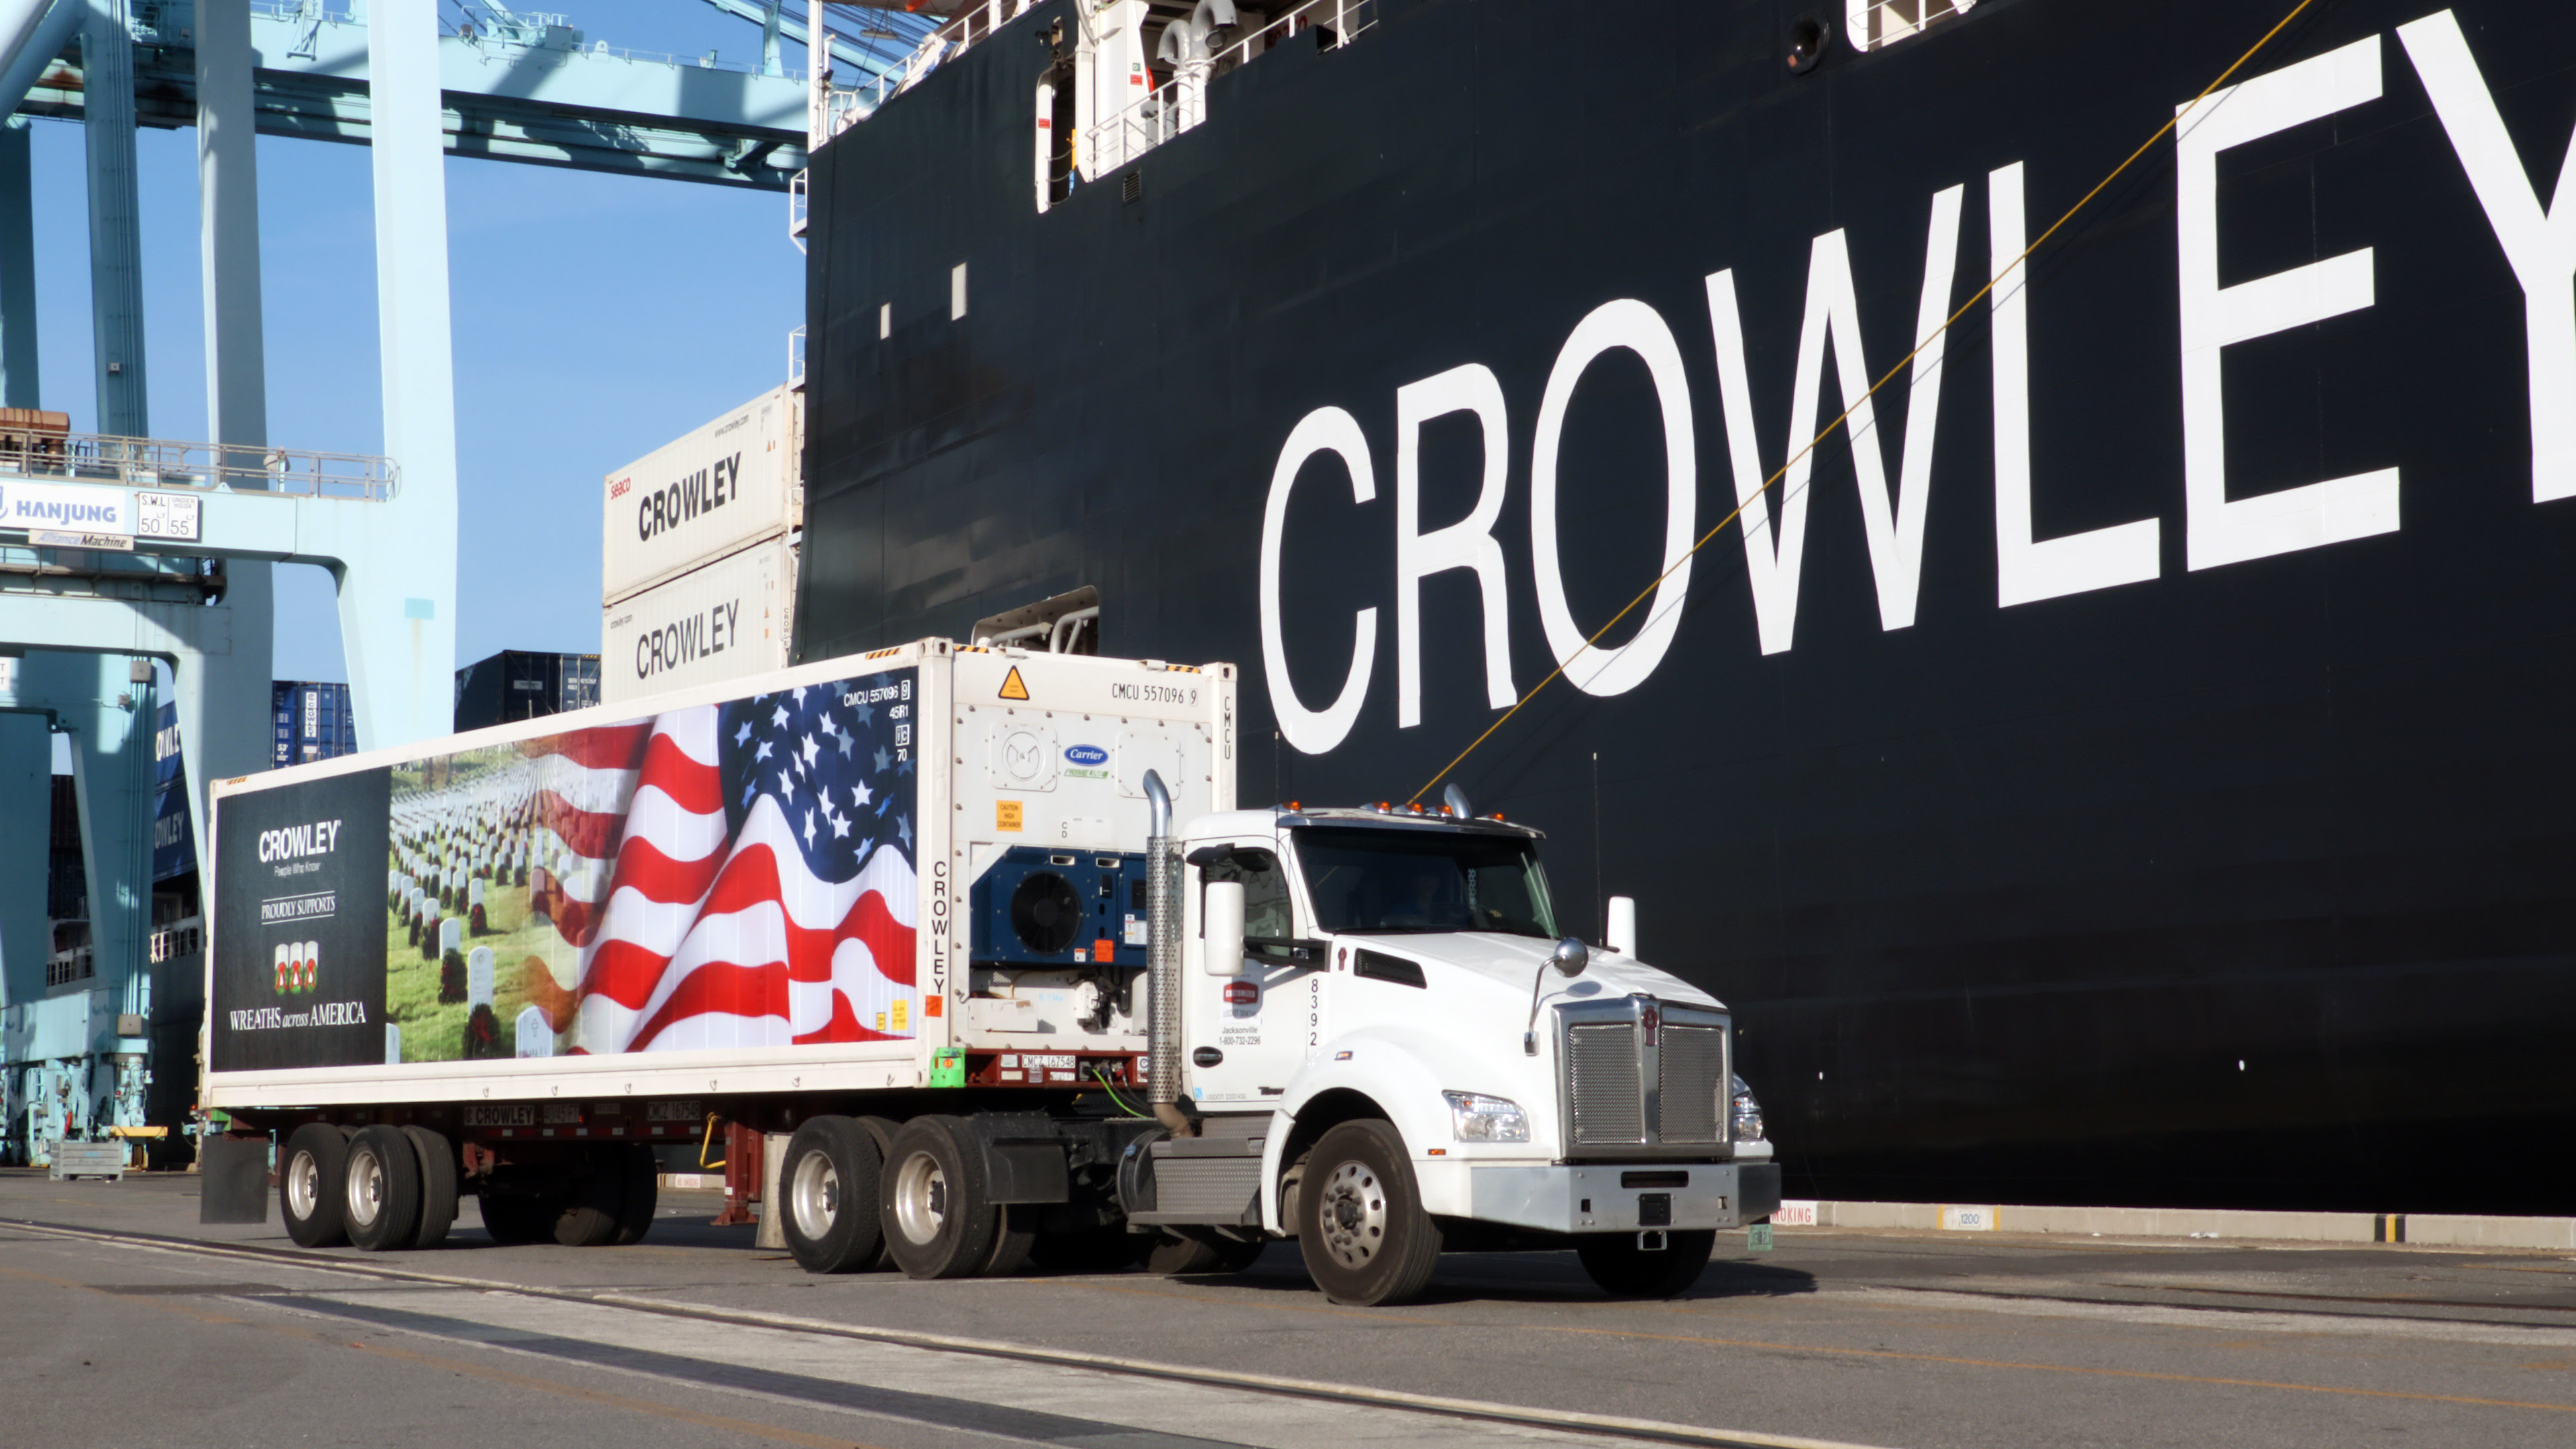 Crowley Logistics serves Puerto Rico and honors veterans and military